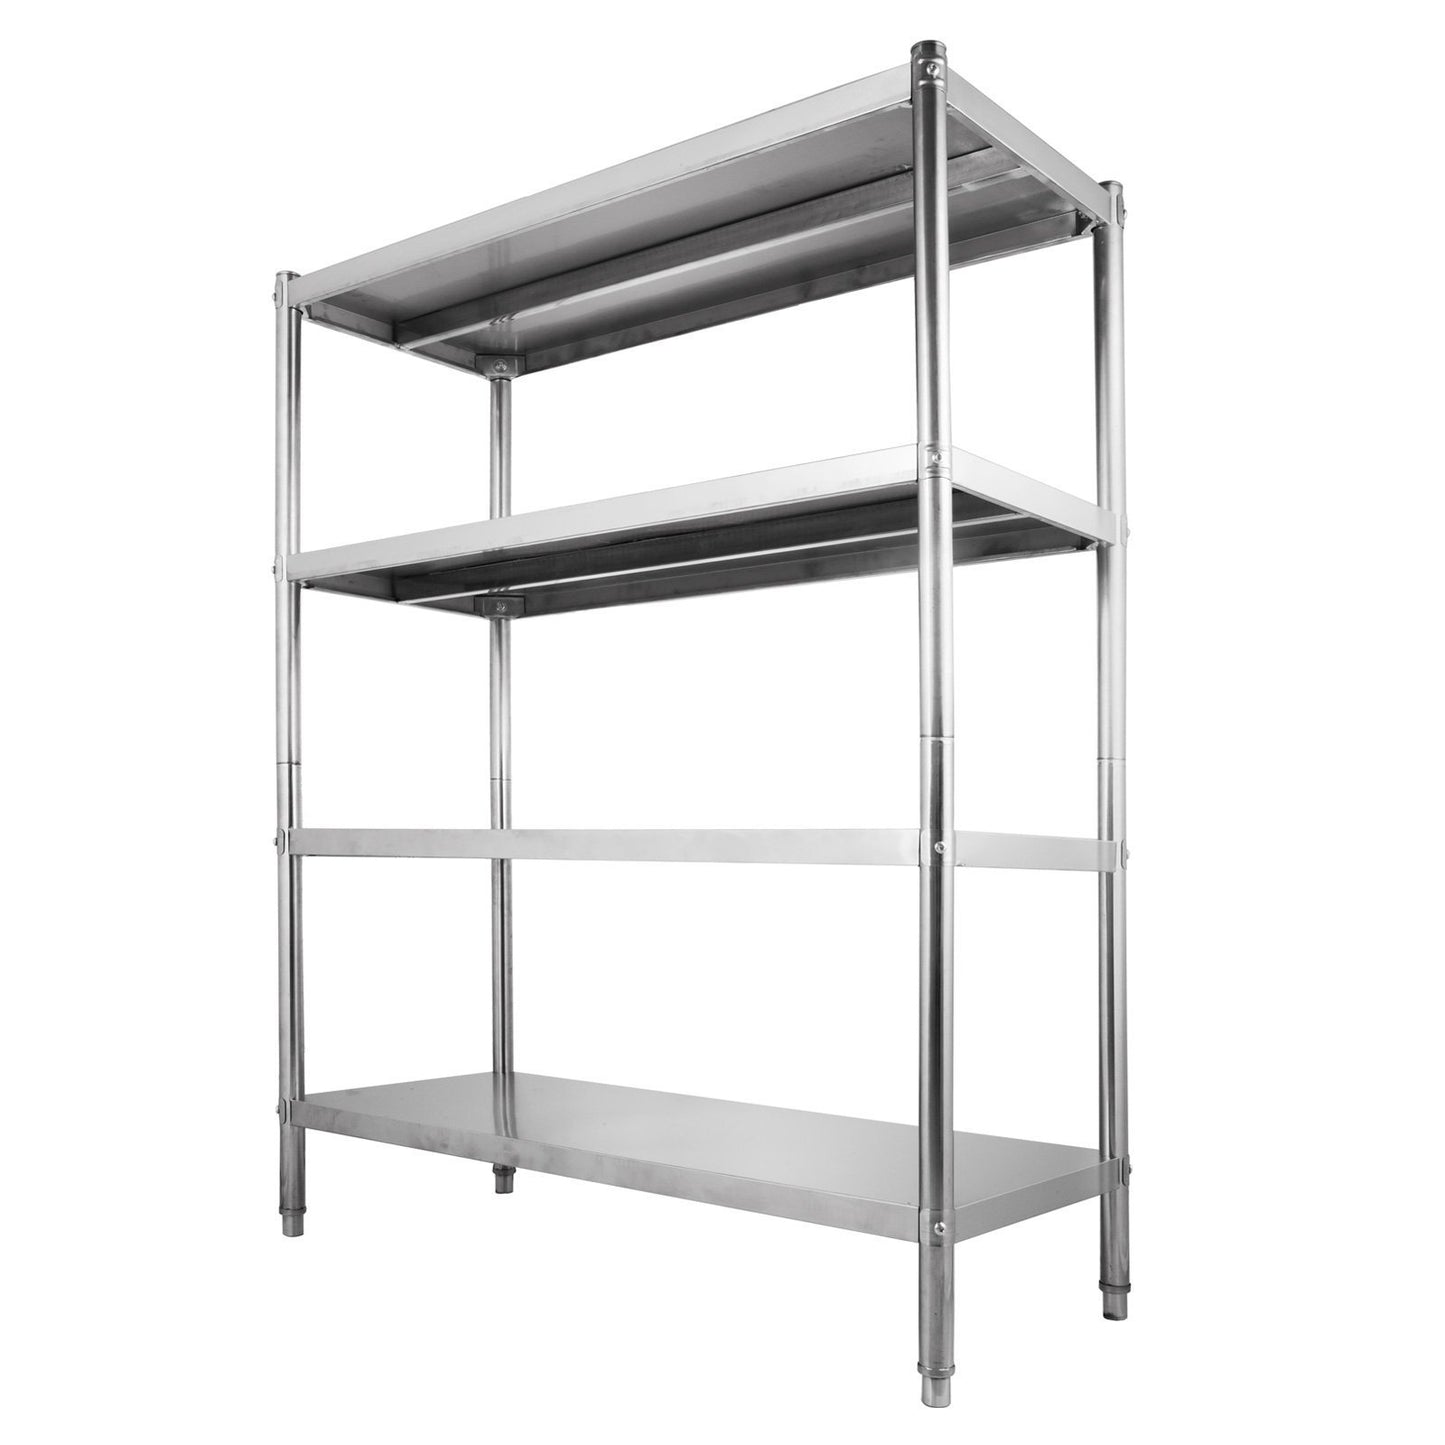 Budget friendly happybuy stainless steel shelving units heavy duty 4 tier shelving units and storage shelf unit for kitchen commercial office garage storage 4 tier 400lb per shelf